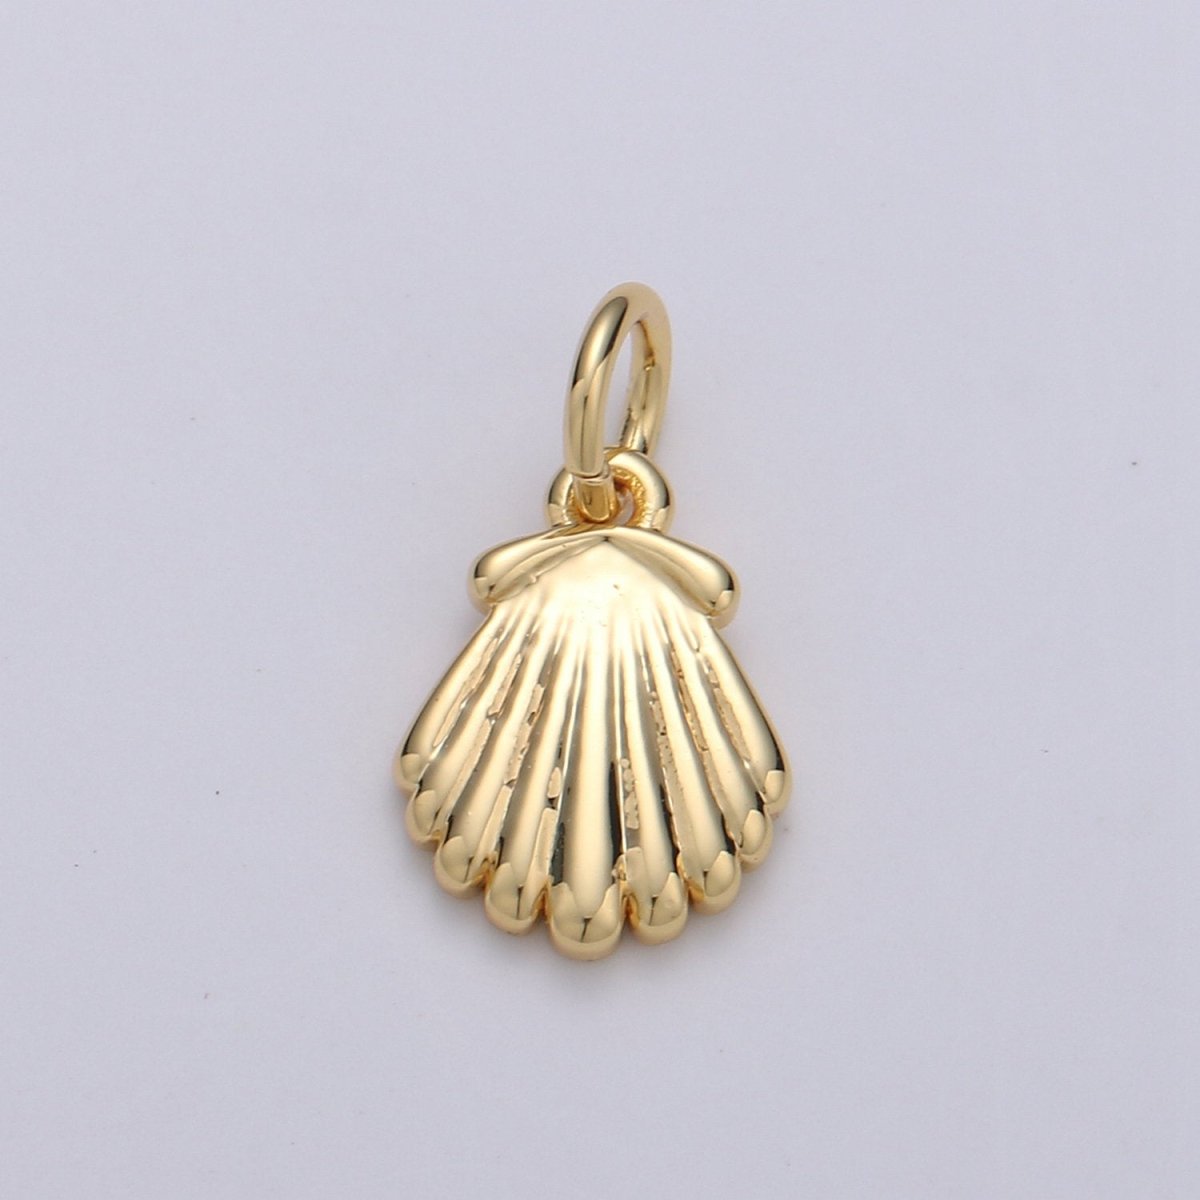 OS Tiny Shell Charm Gold Sea Shell Pendant for Bracelet Earring Necklace Component D-588 - DLUXCA